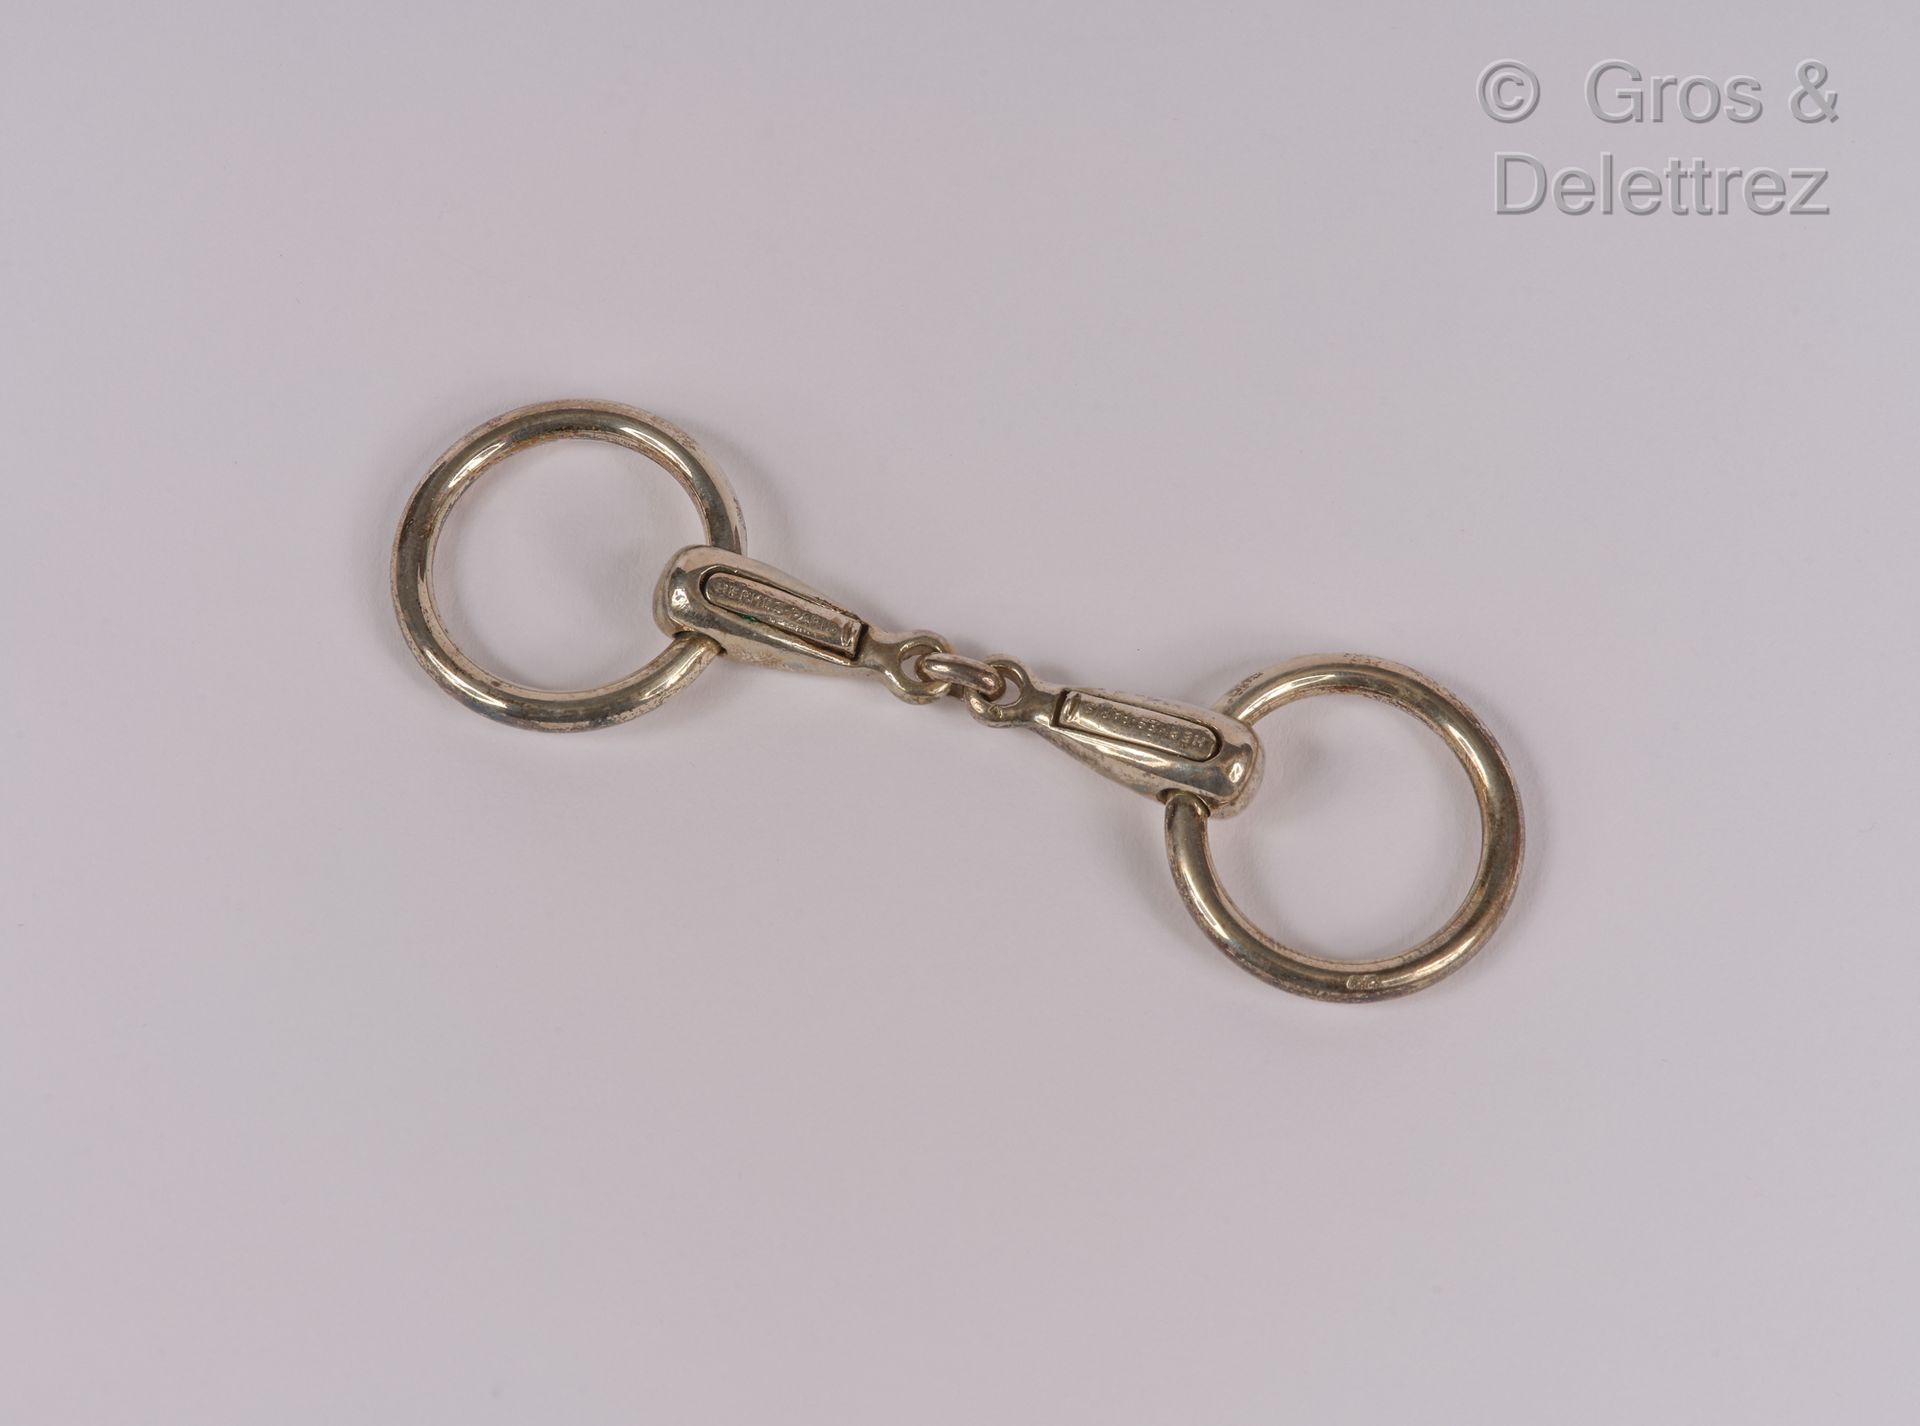 HERMES Paris Keychain " Mors " in silver 925 thousandths. Pds: 21,5 grs.